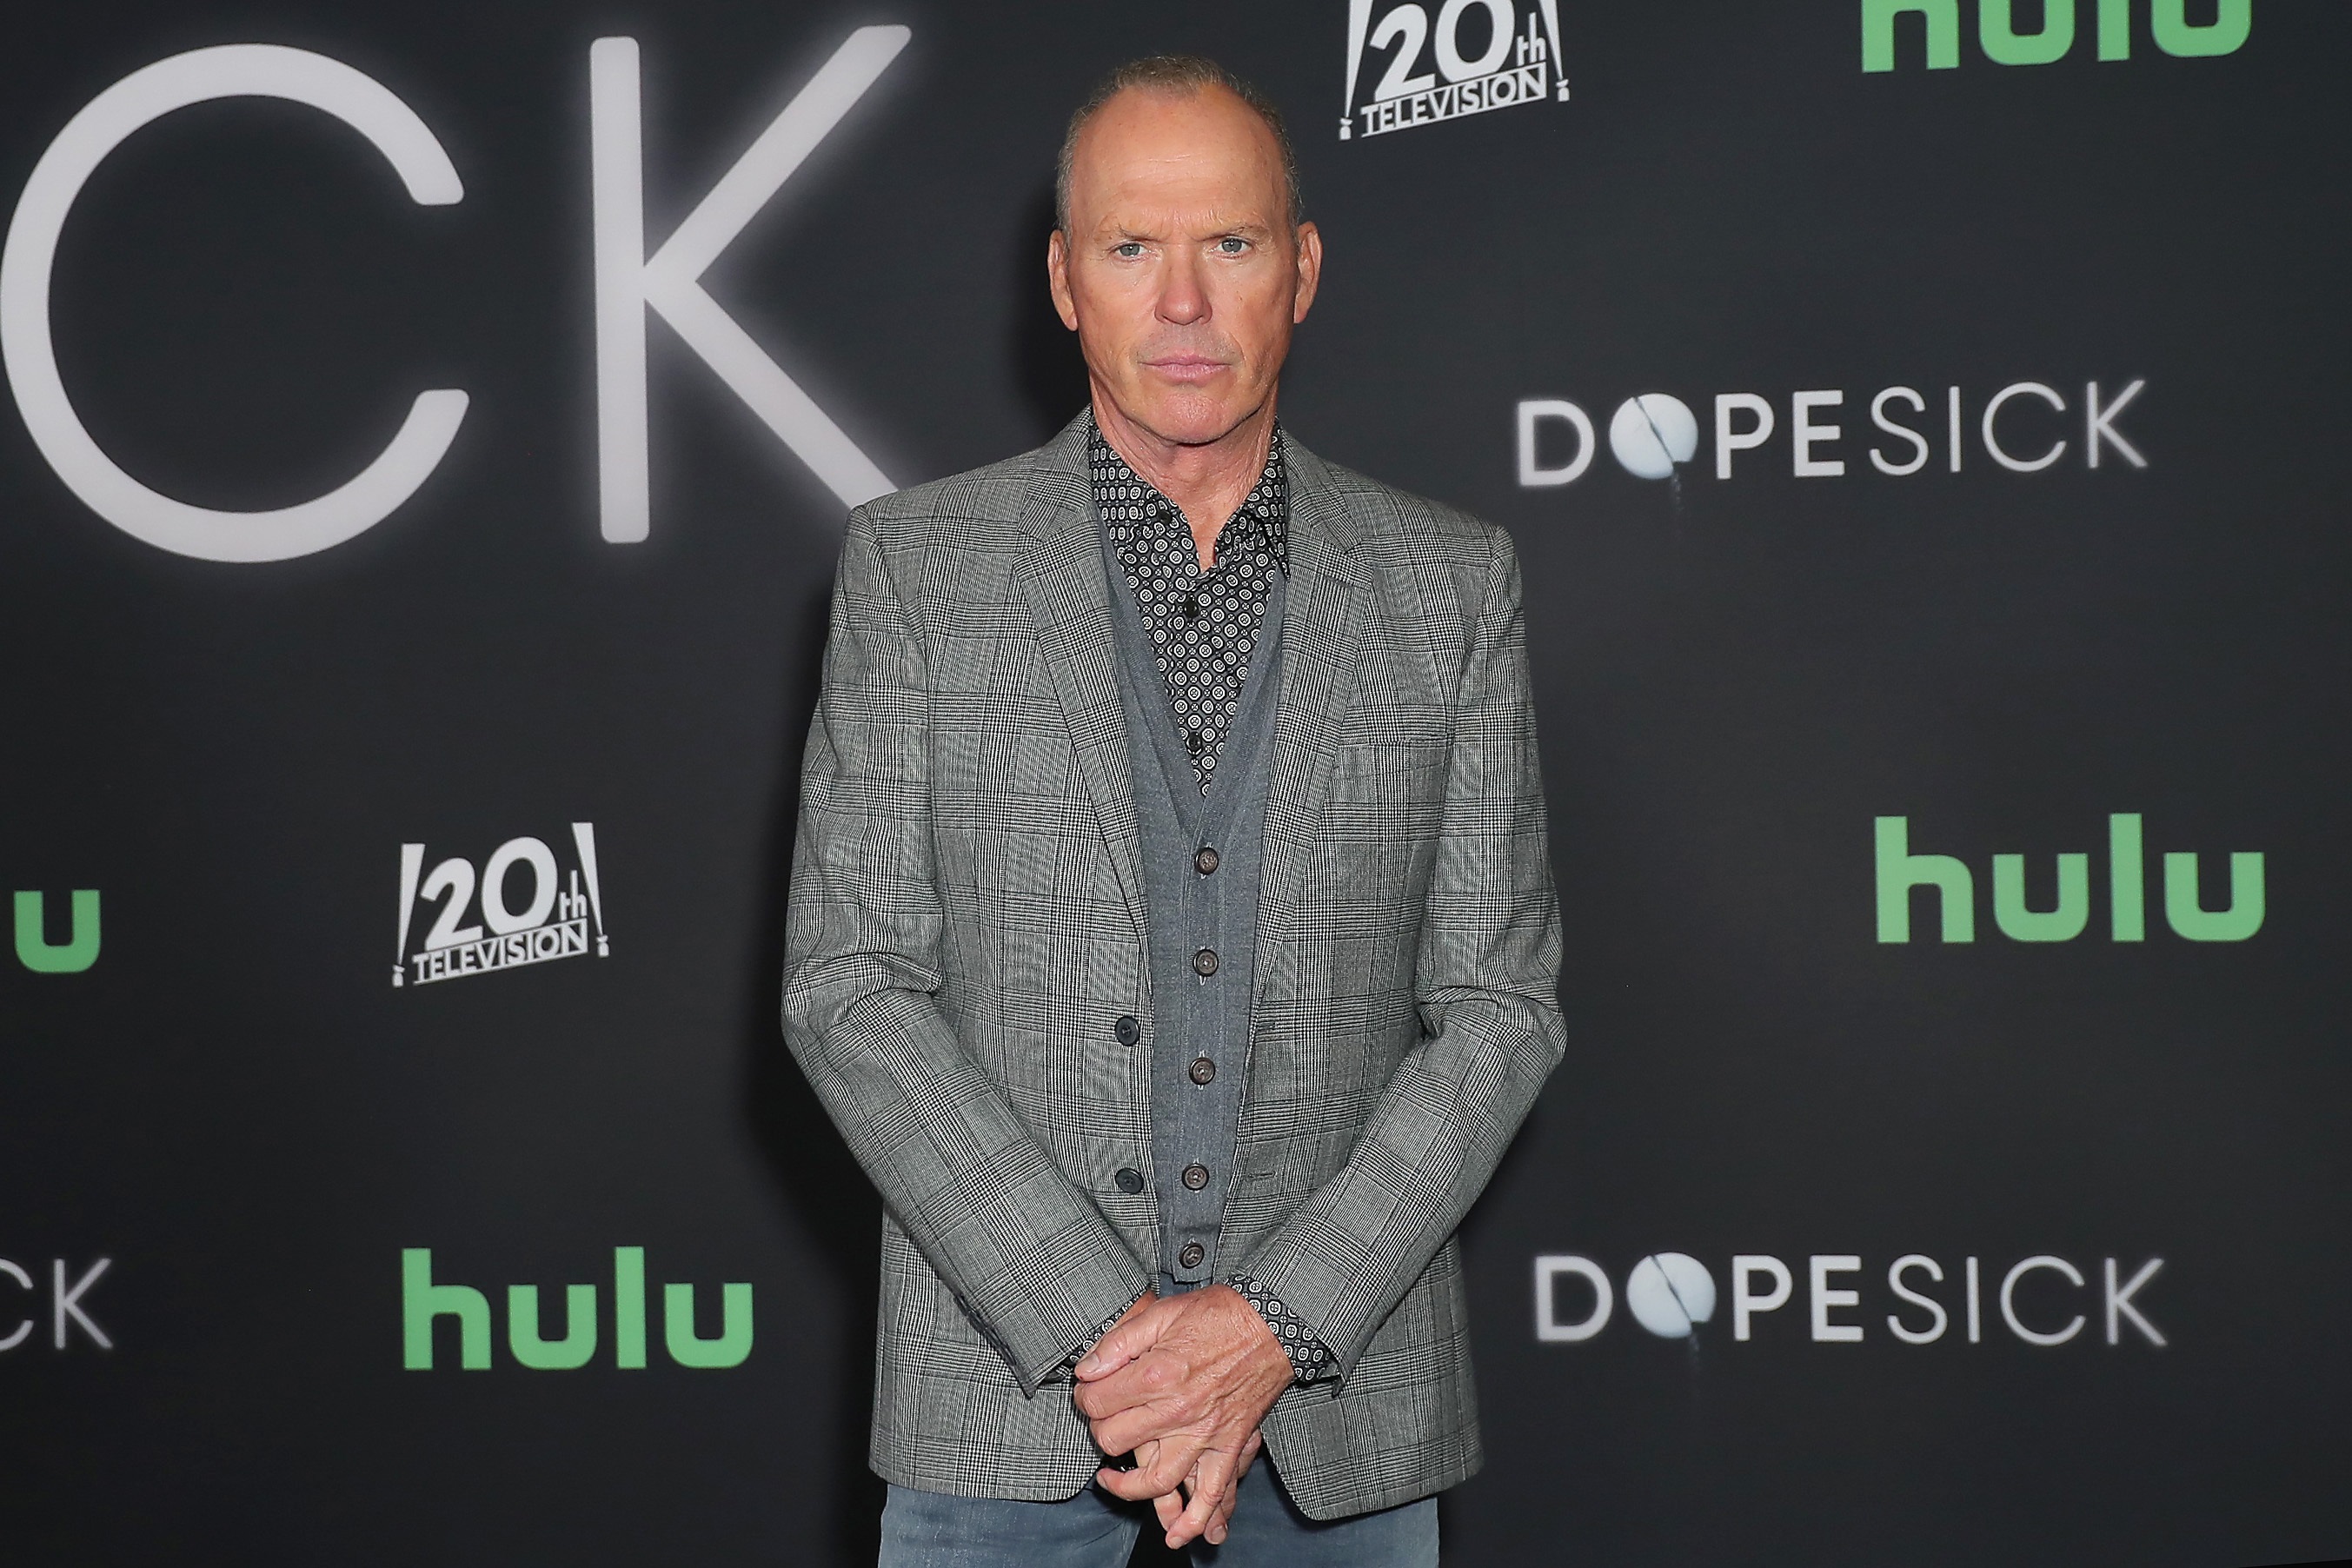 Michael Keaton posing for photographers at the 'Dopesick' premiere